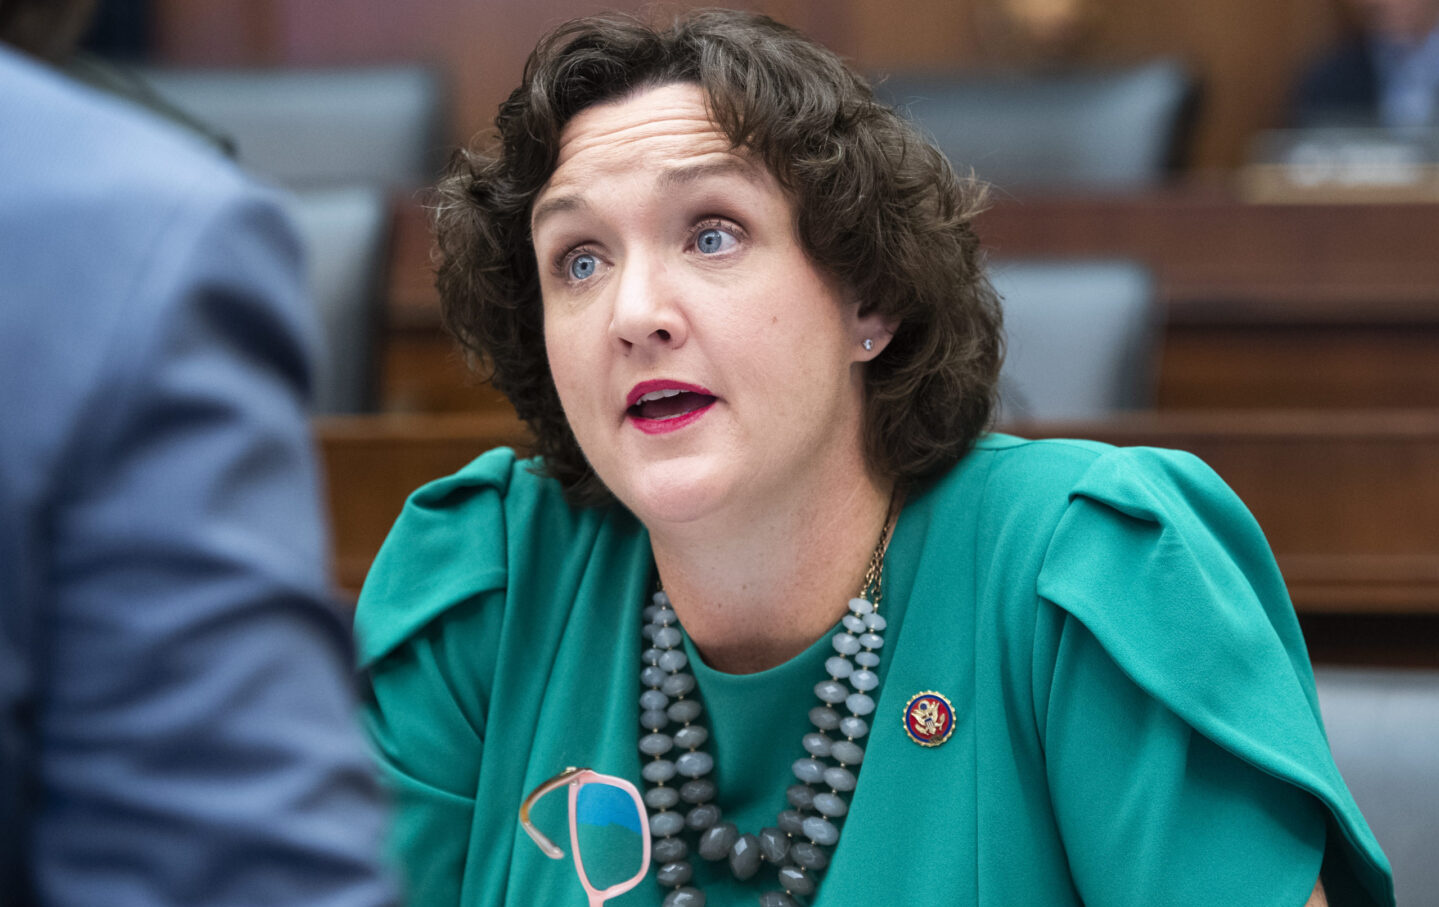 Image for Representative Katie Porter | Putting Working People First